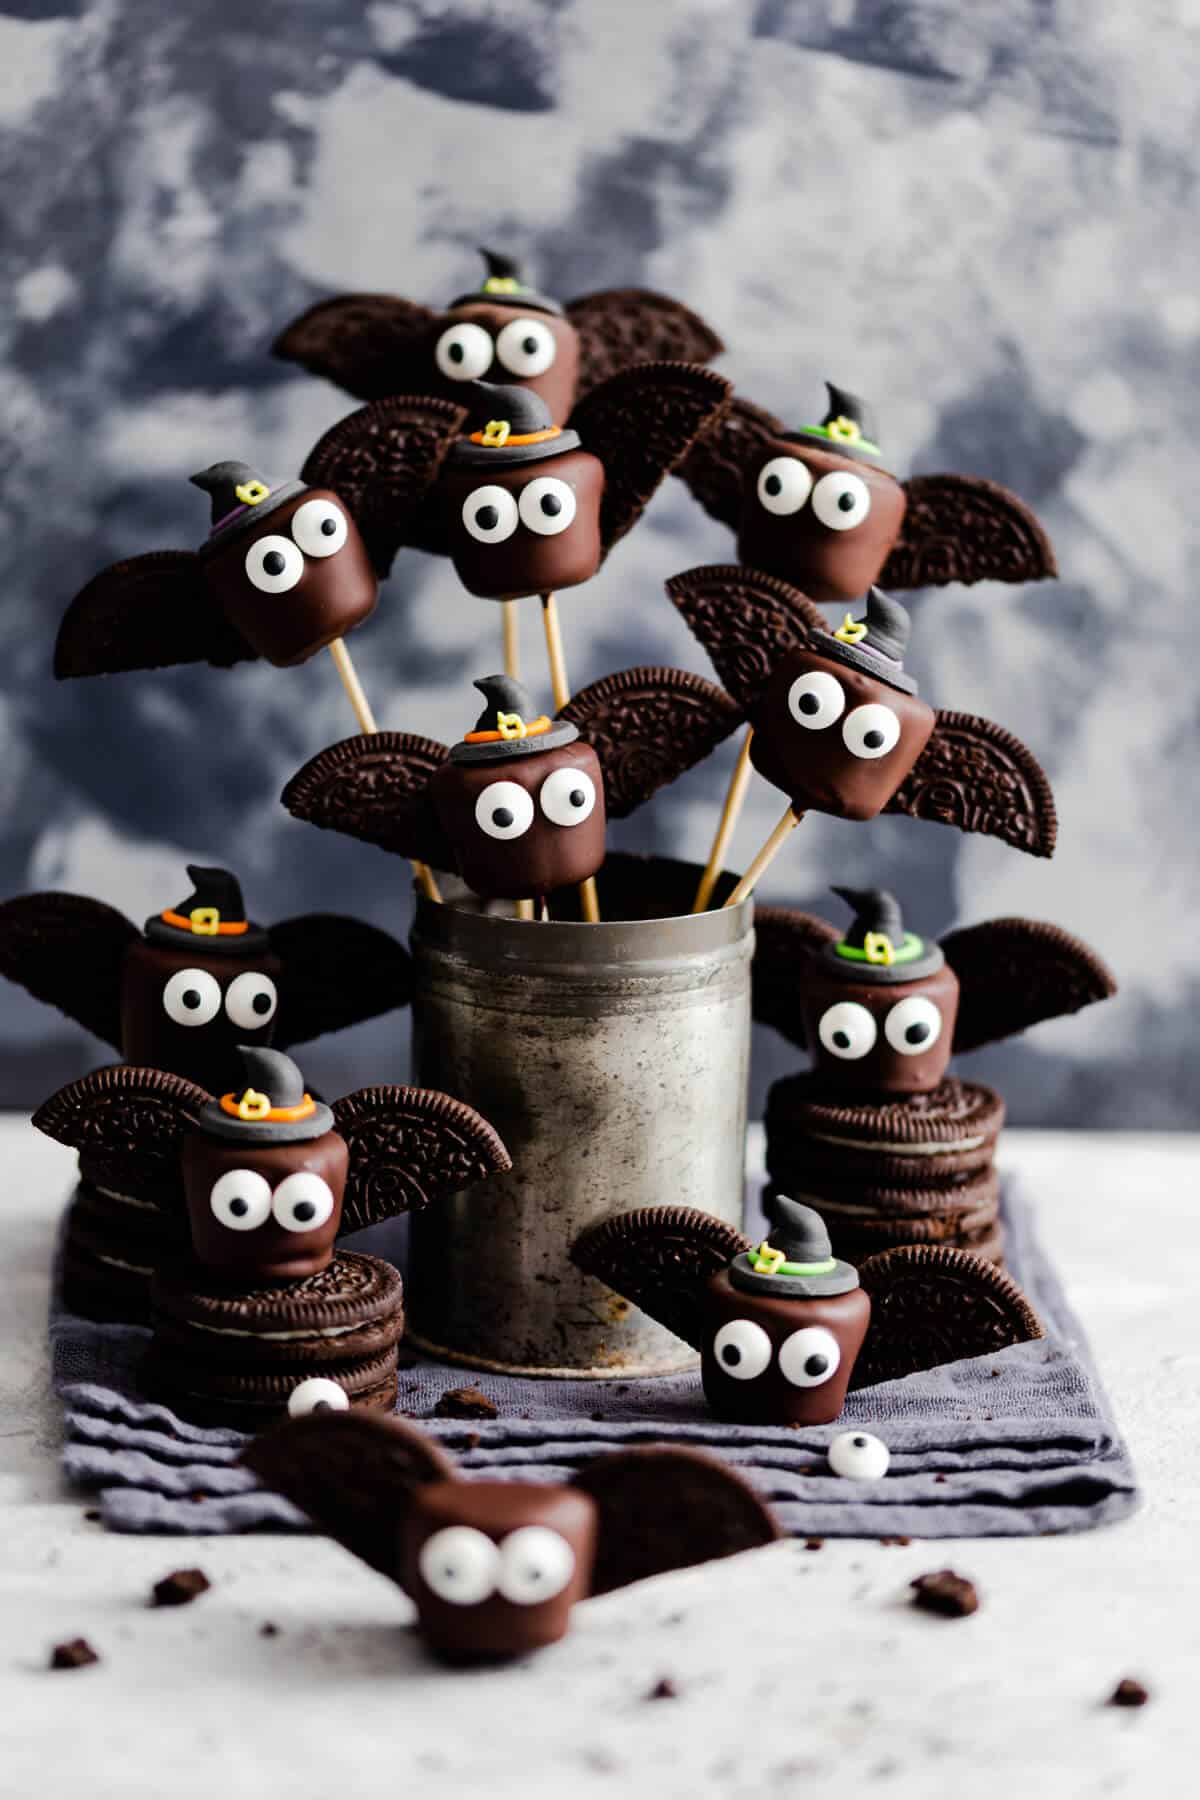 side angle of chocolate marshmallows looking like little bats on bamboo skewers